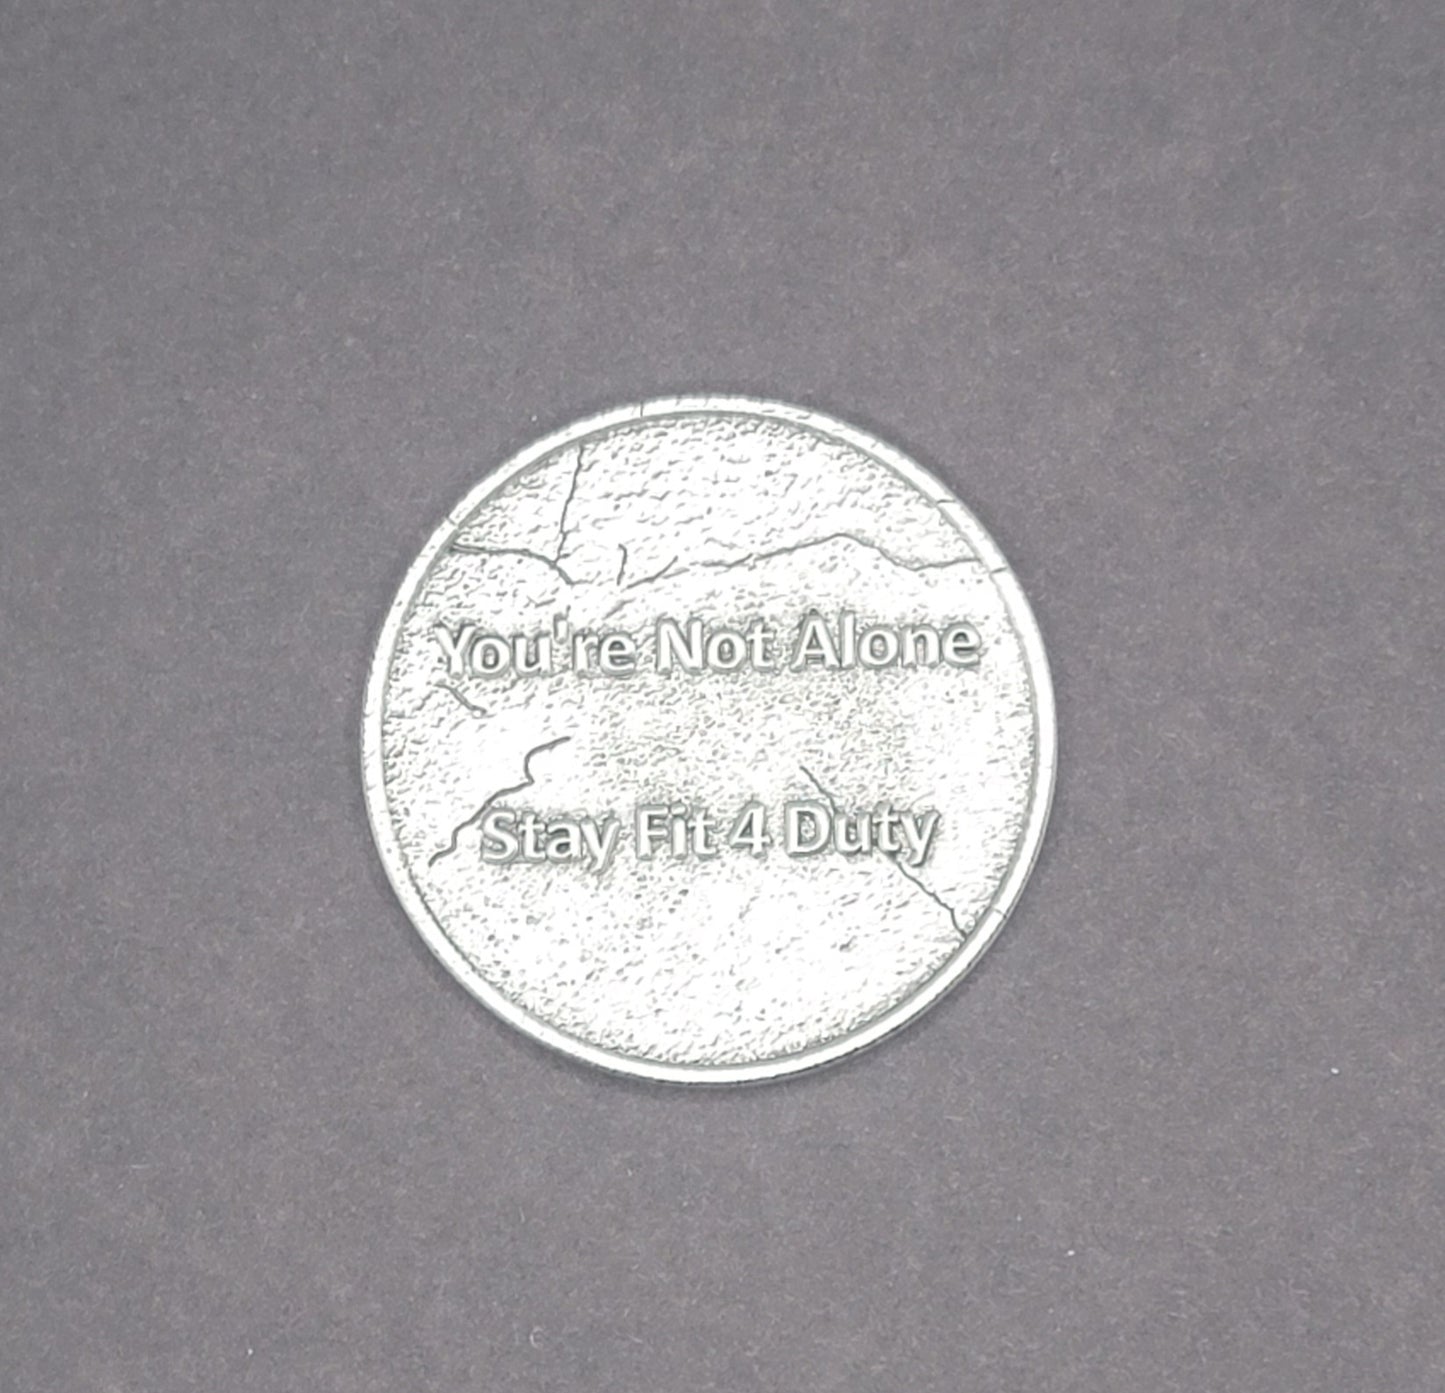 Stay Fit 4 Duty Challenge Coin